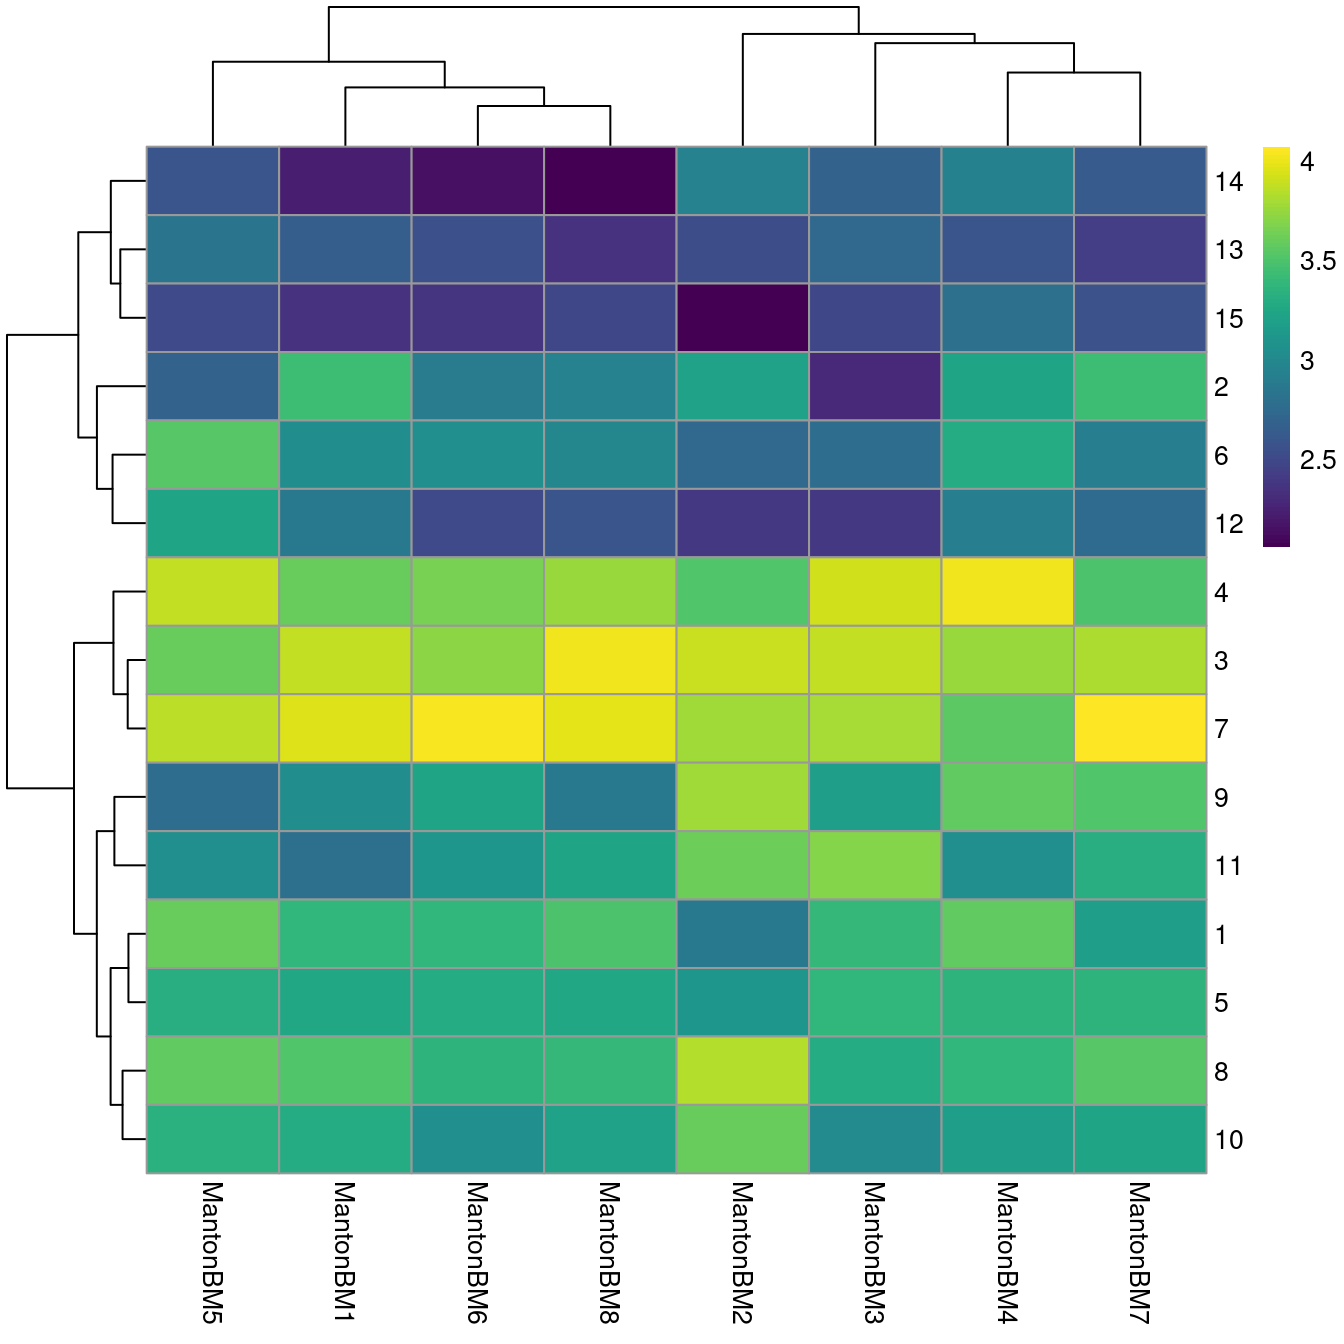 Heatmap of log~10~-number of cells in each cluster (row) from each sample (column).